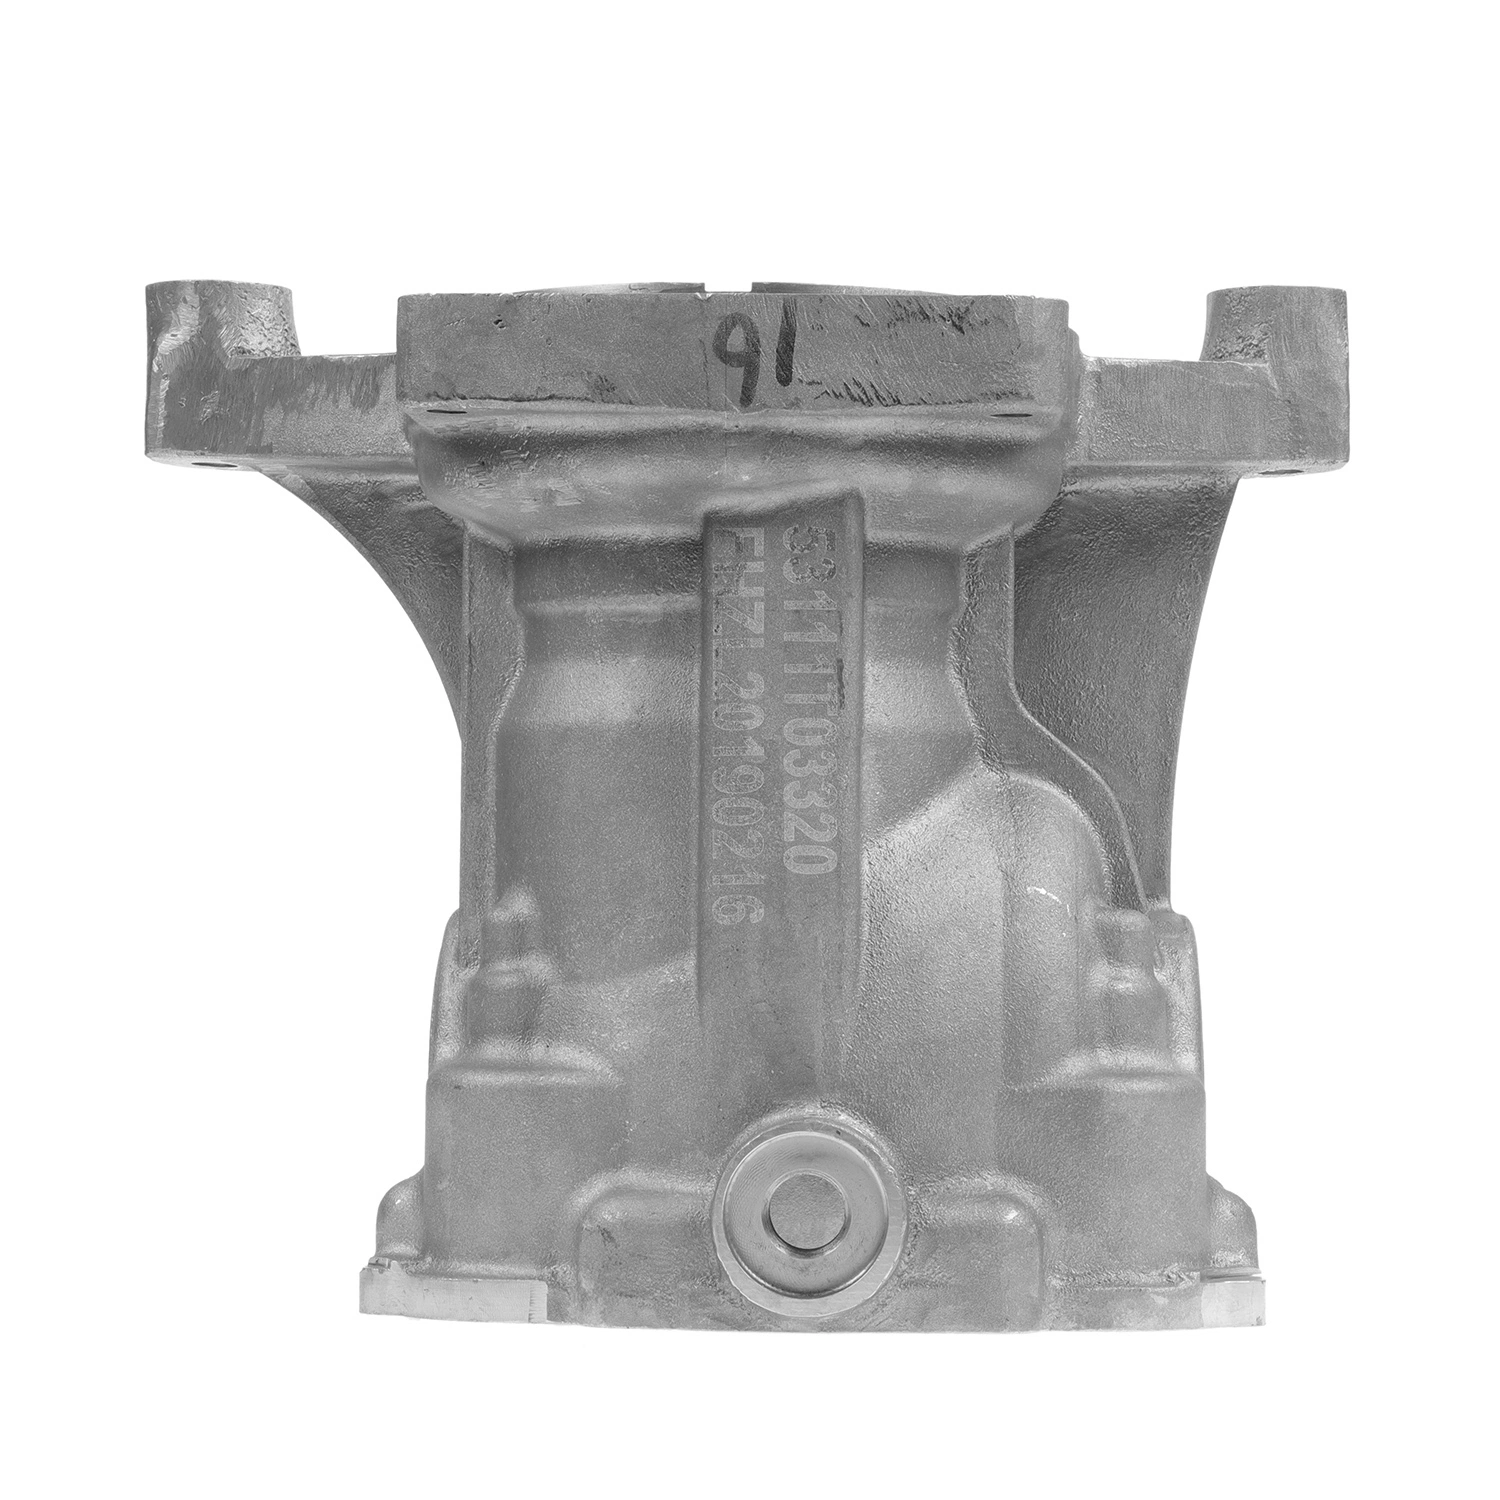 Metal Processing Machinery OEM Customized 3D Printing Sand Core Mold Patternless Casting Manufacturing Cast Iron Parts by Rapid Prototyping CNC Machining